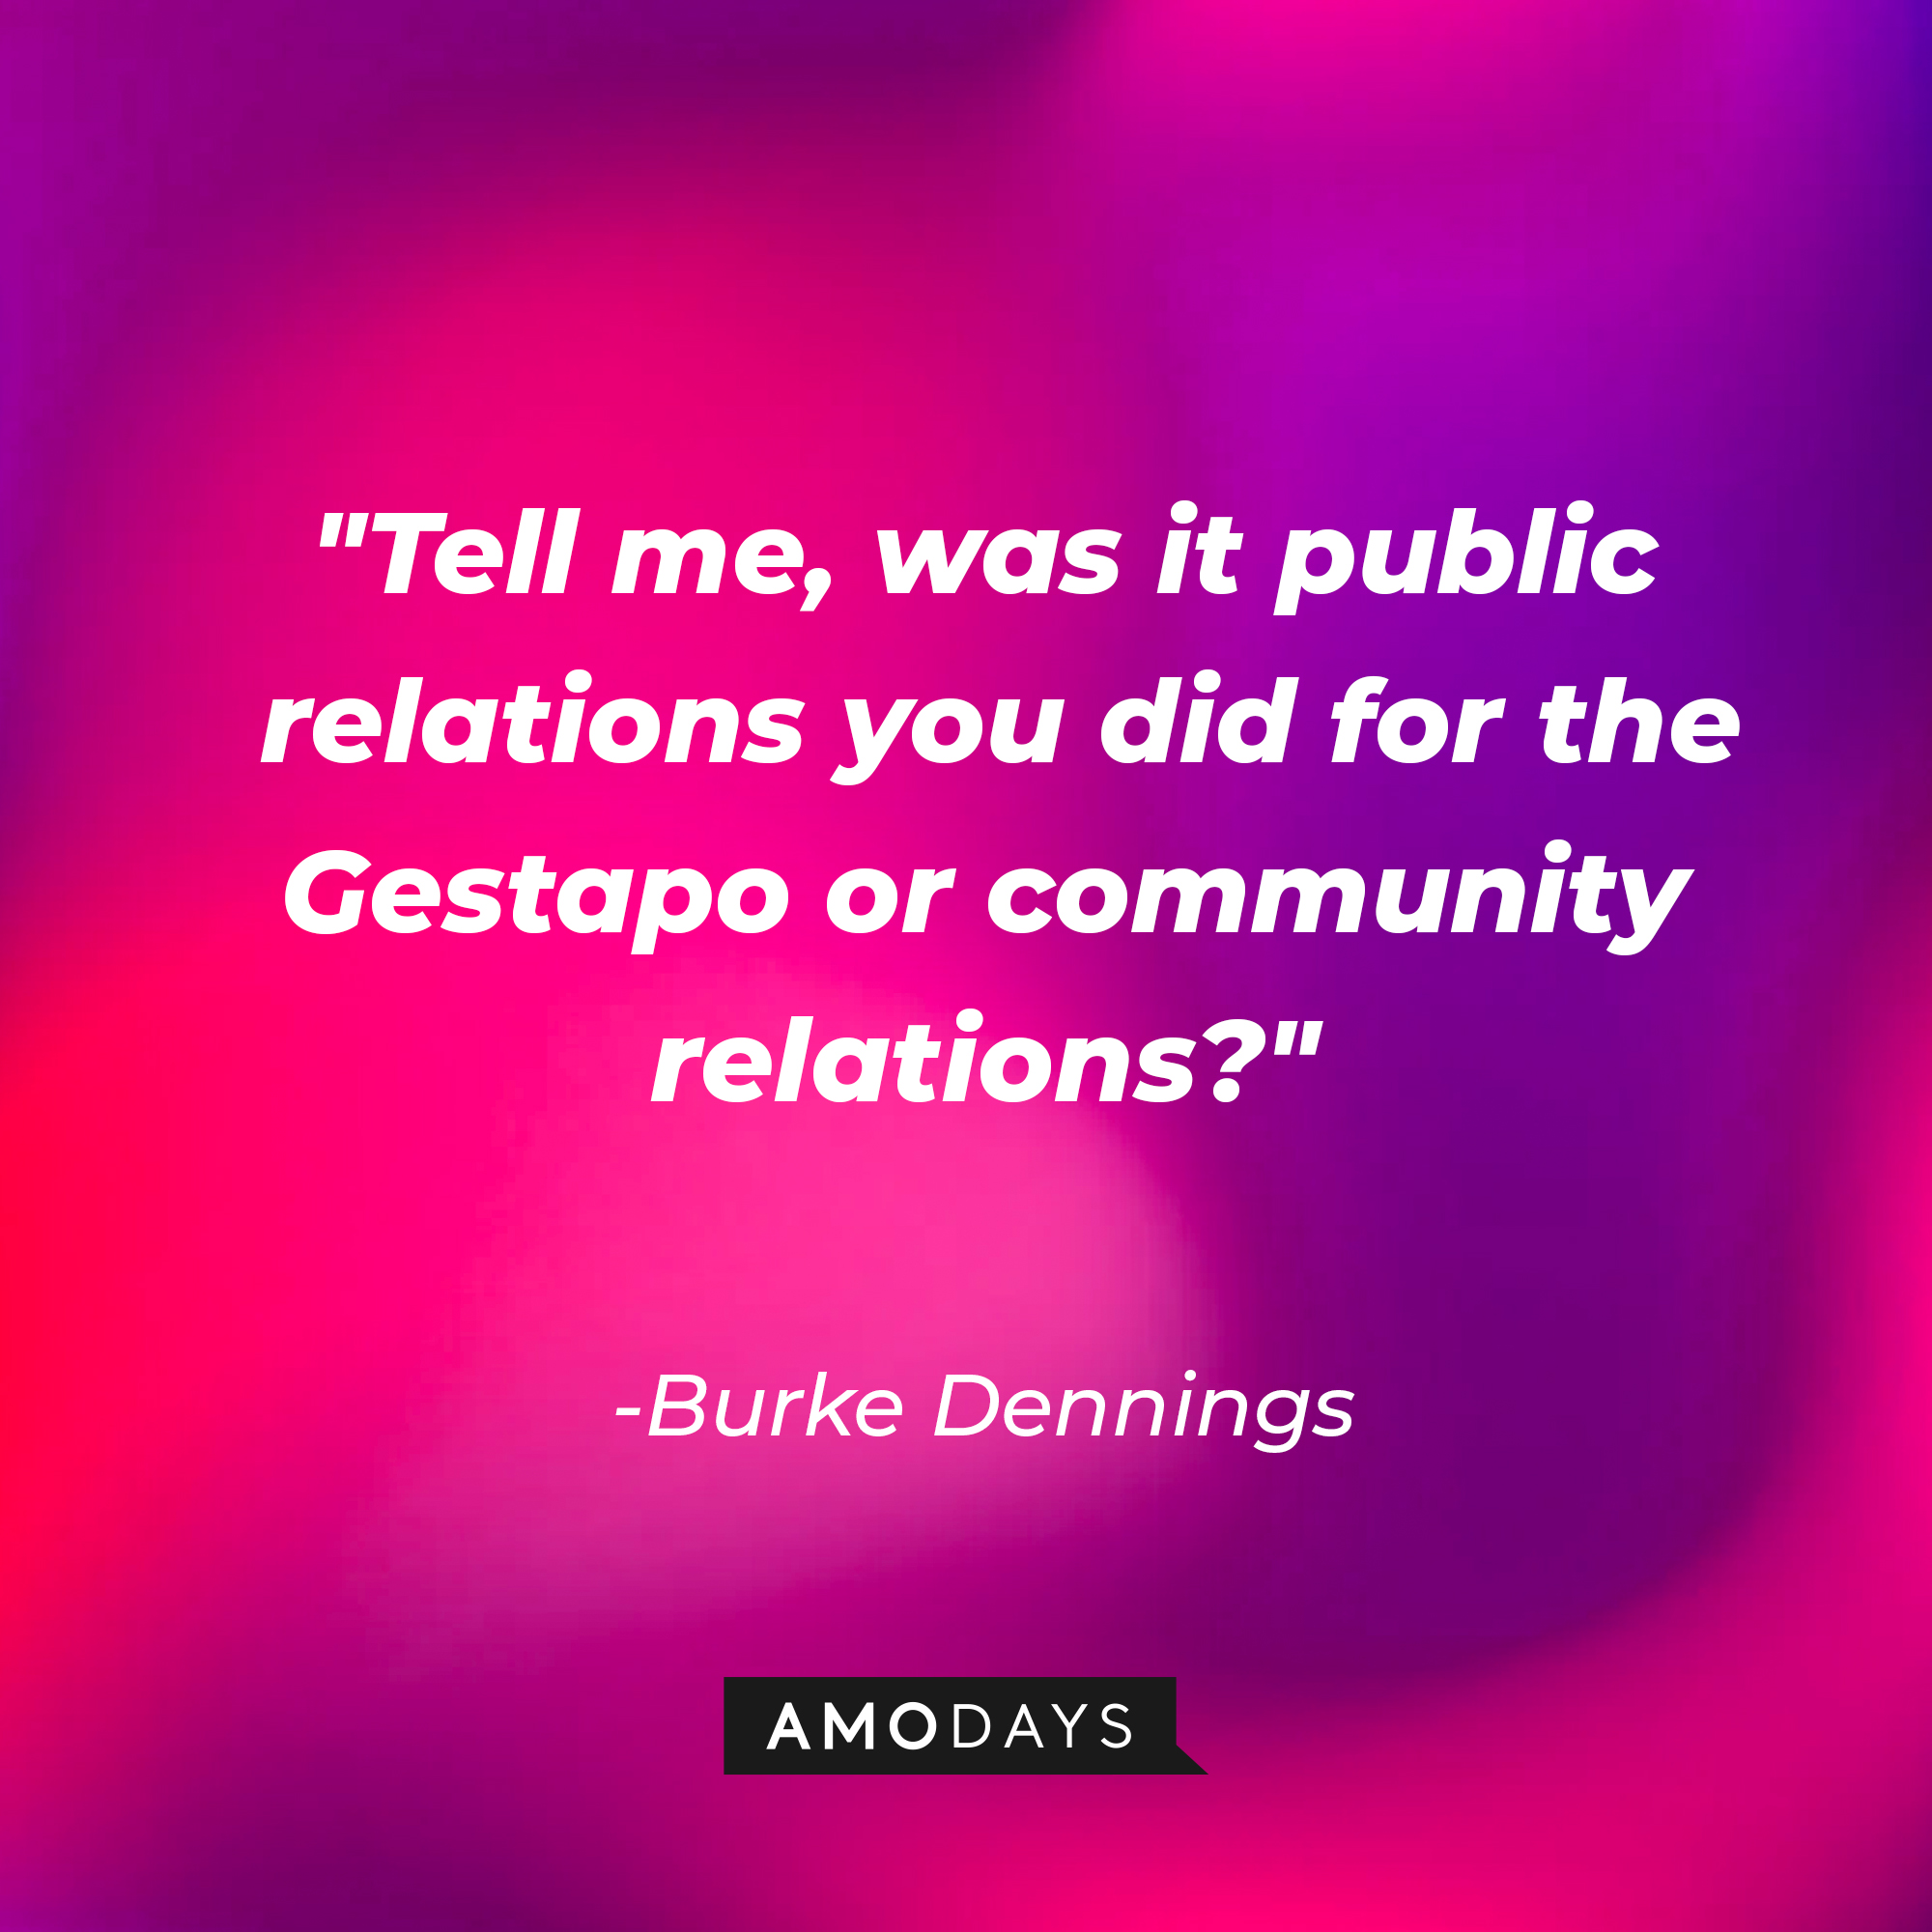 Burke Dennings' quote: "Tell me, was it public relations you did for the Gestapo or community relations?" | Source: AmoDAys